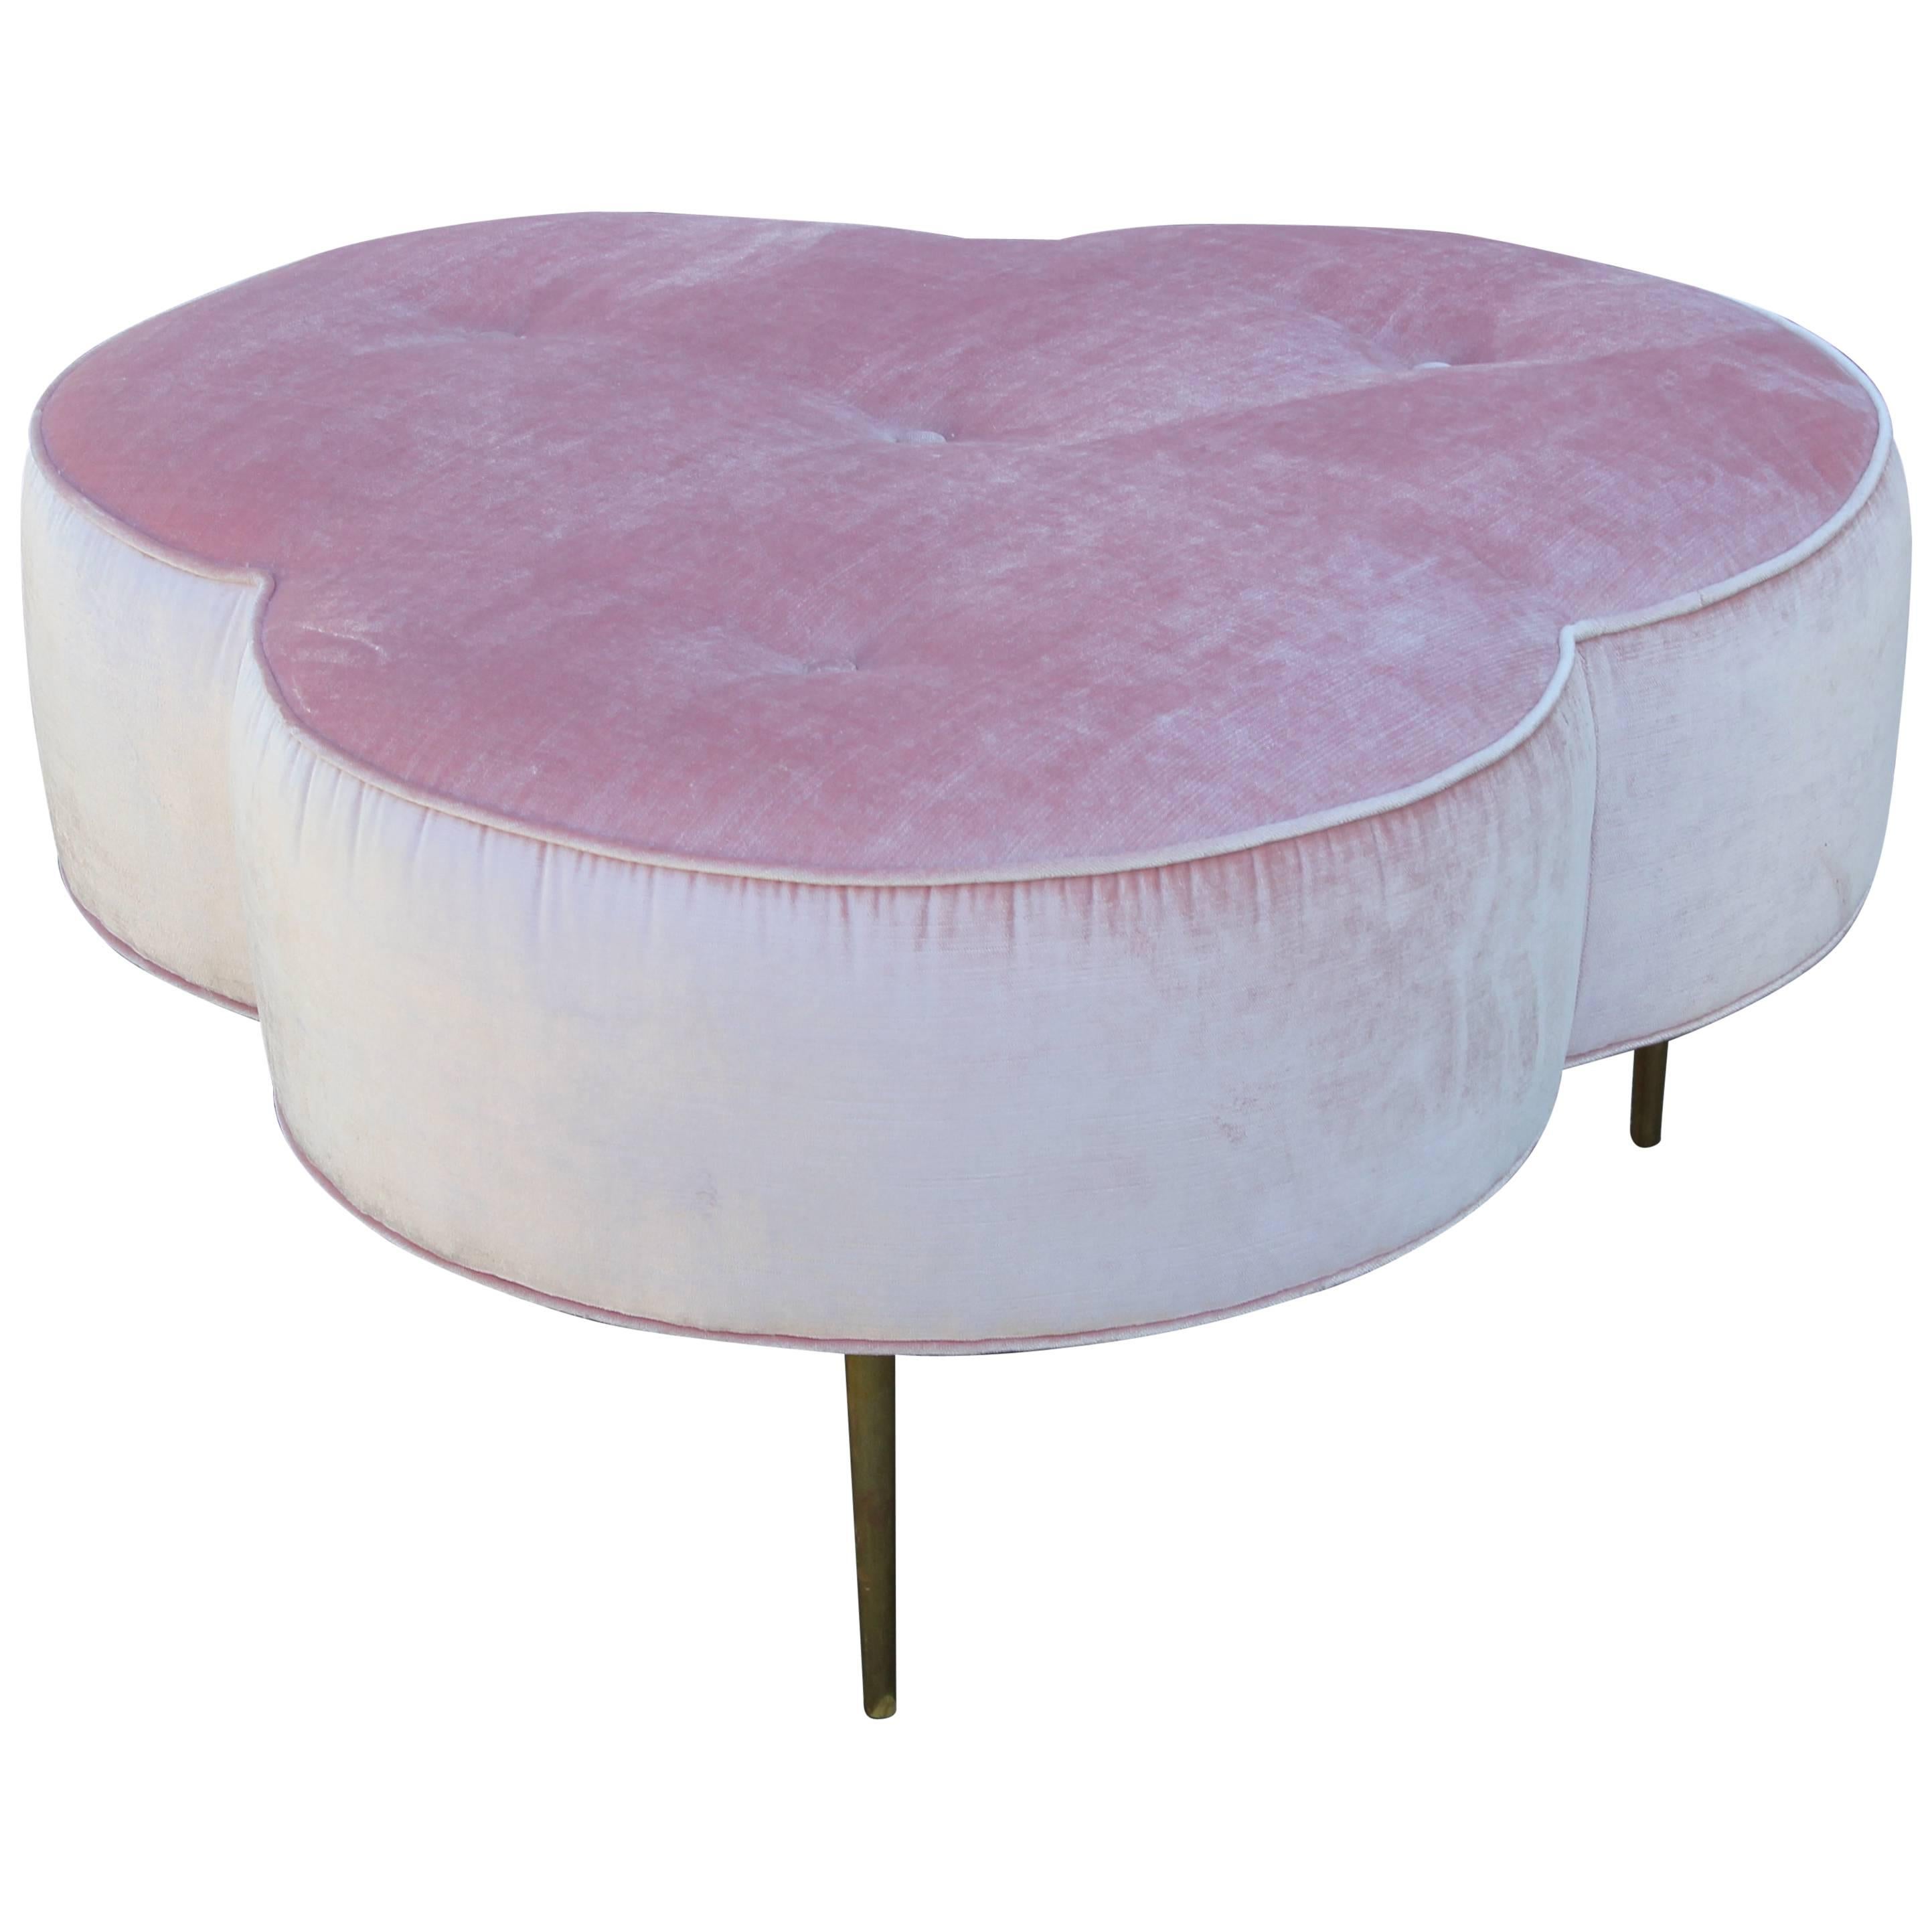 Wonderful trefoil shaped ottoman handmade in Houston, Texas. Hollywood regency style ottoman, upholstered in pink velvet but can be upholstered in your choice of fabric as well. Cushion is piped and tufted with four 1